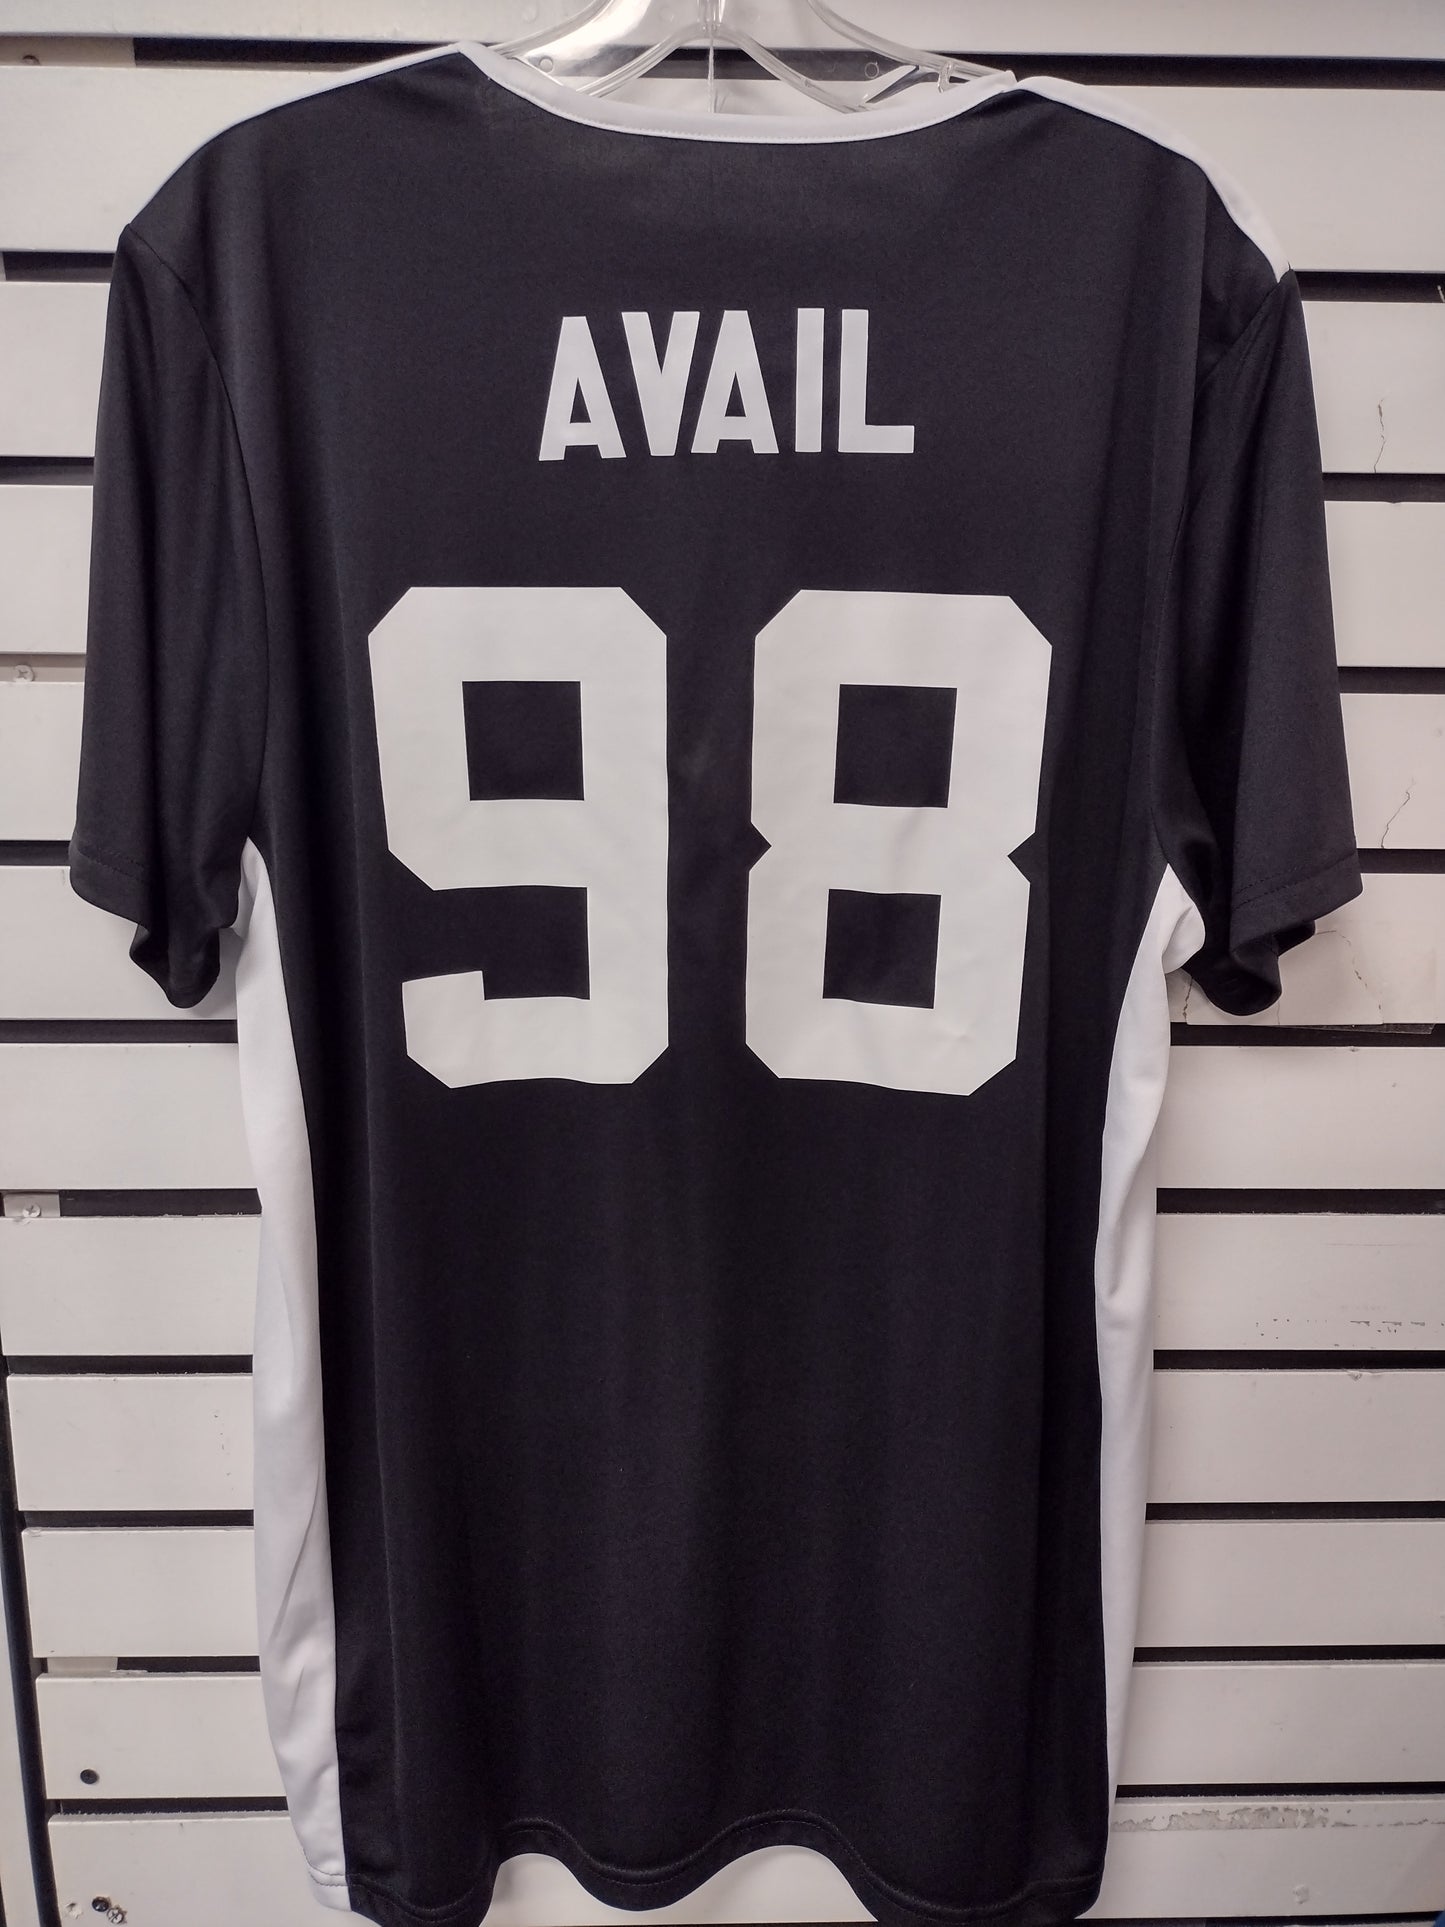 adidas Avail Over The James 98 Jersey Men's Large "Avail 98" on back